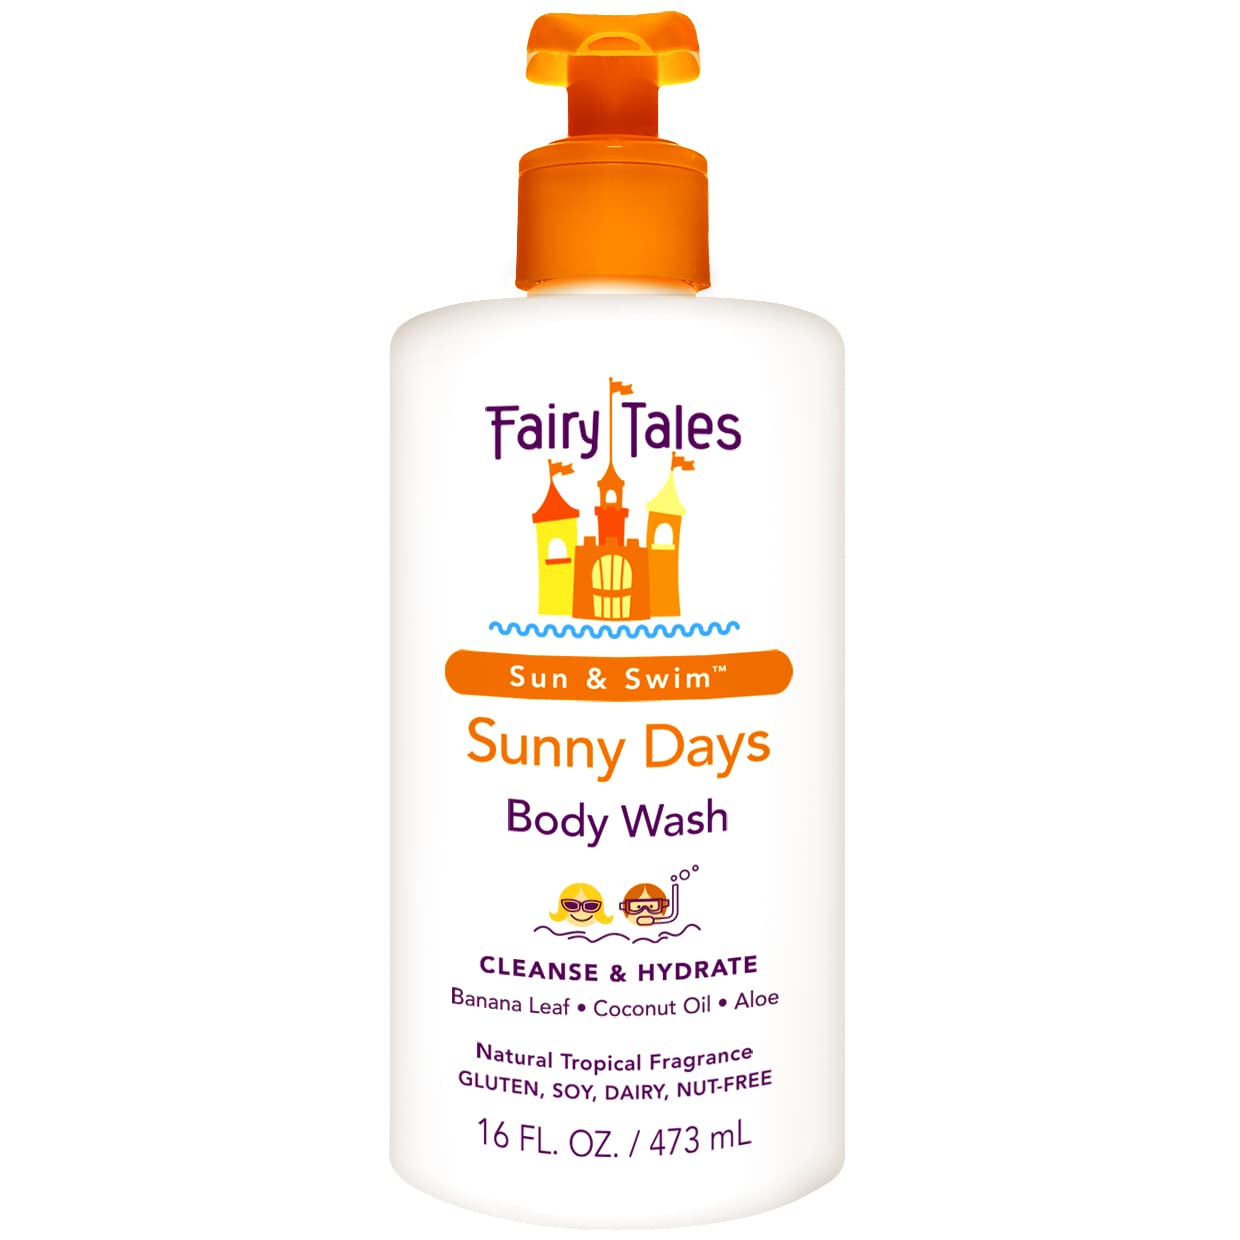 Fairy Tales Sunny Days Chlorine Removal Body Wash, For All Age Swimmers - After Swim Chlorine, Salt And Sunscreen Removal - No Harsh Chemicals or Toxins - Easy to use Pump - 16